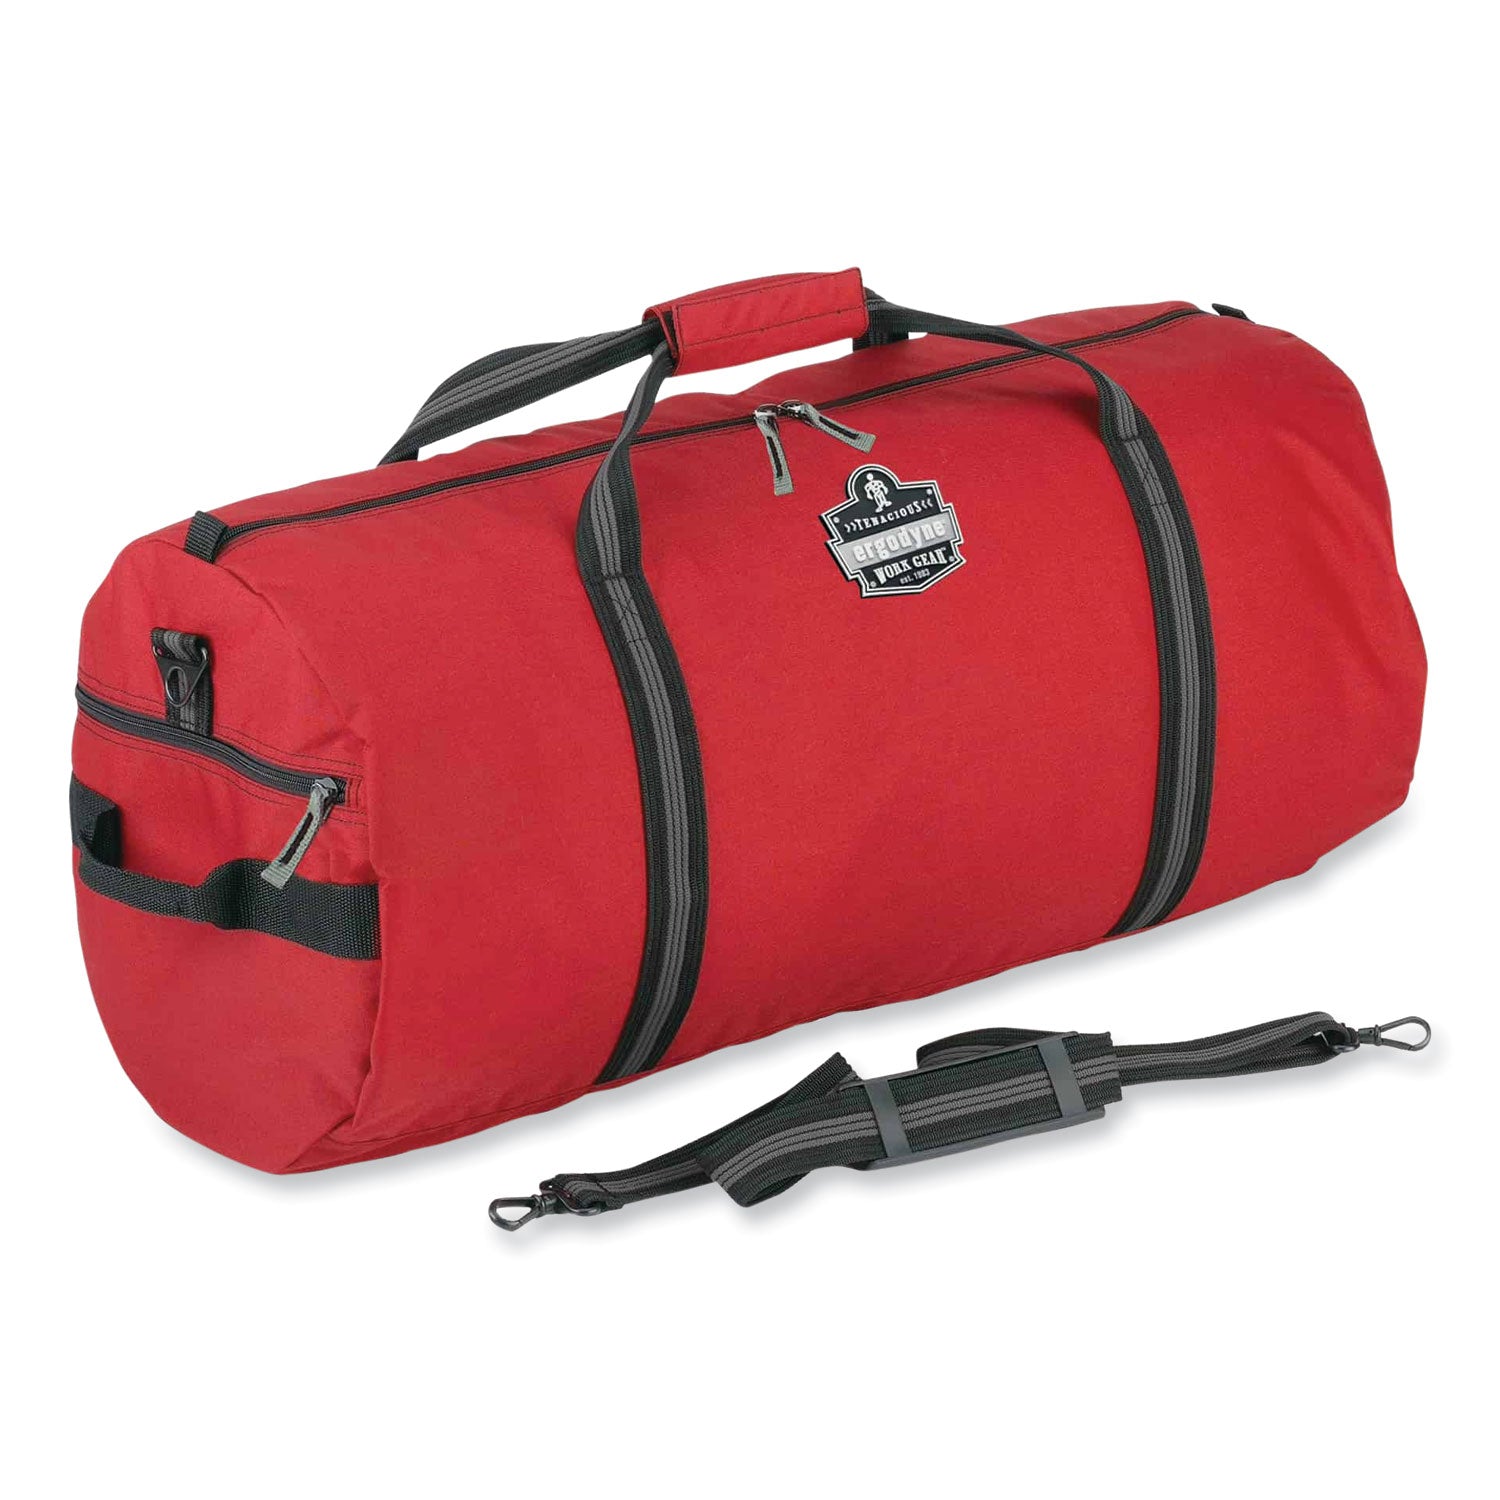 arsenal-5020-gear-duffel-bag-nylon-small-12-x-23-x-12-red-ships-in-1-3-business-days_ego13020 - 1